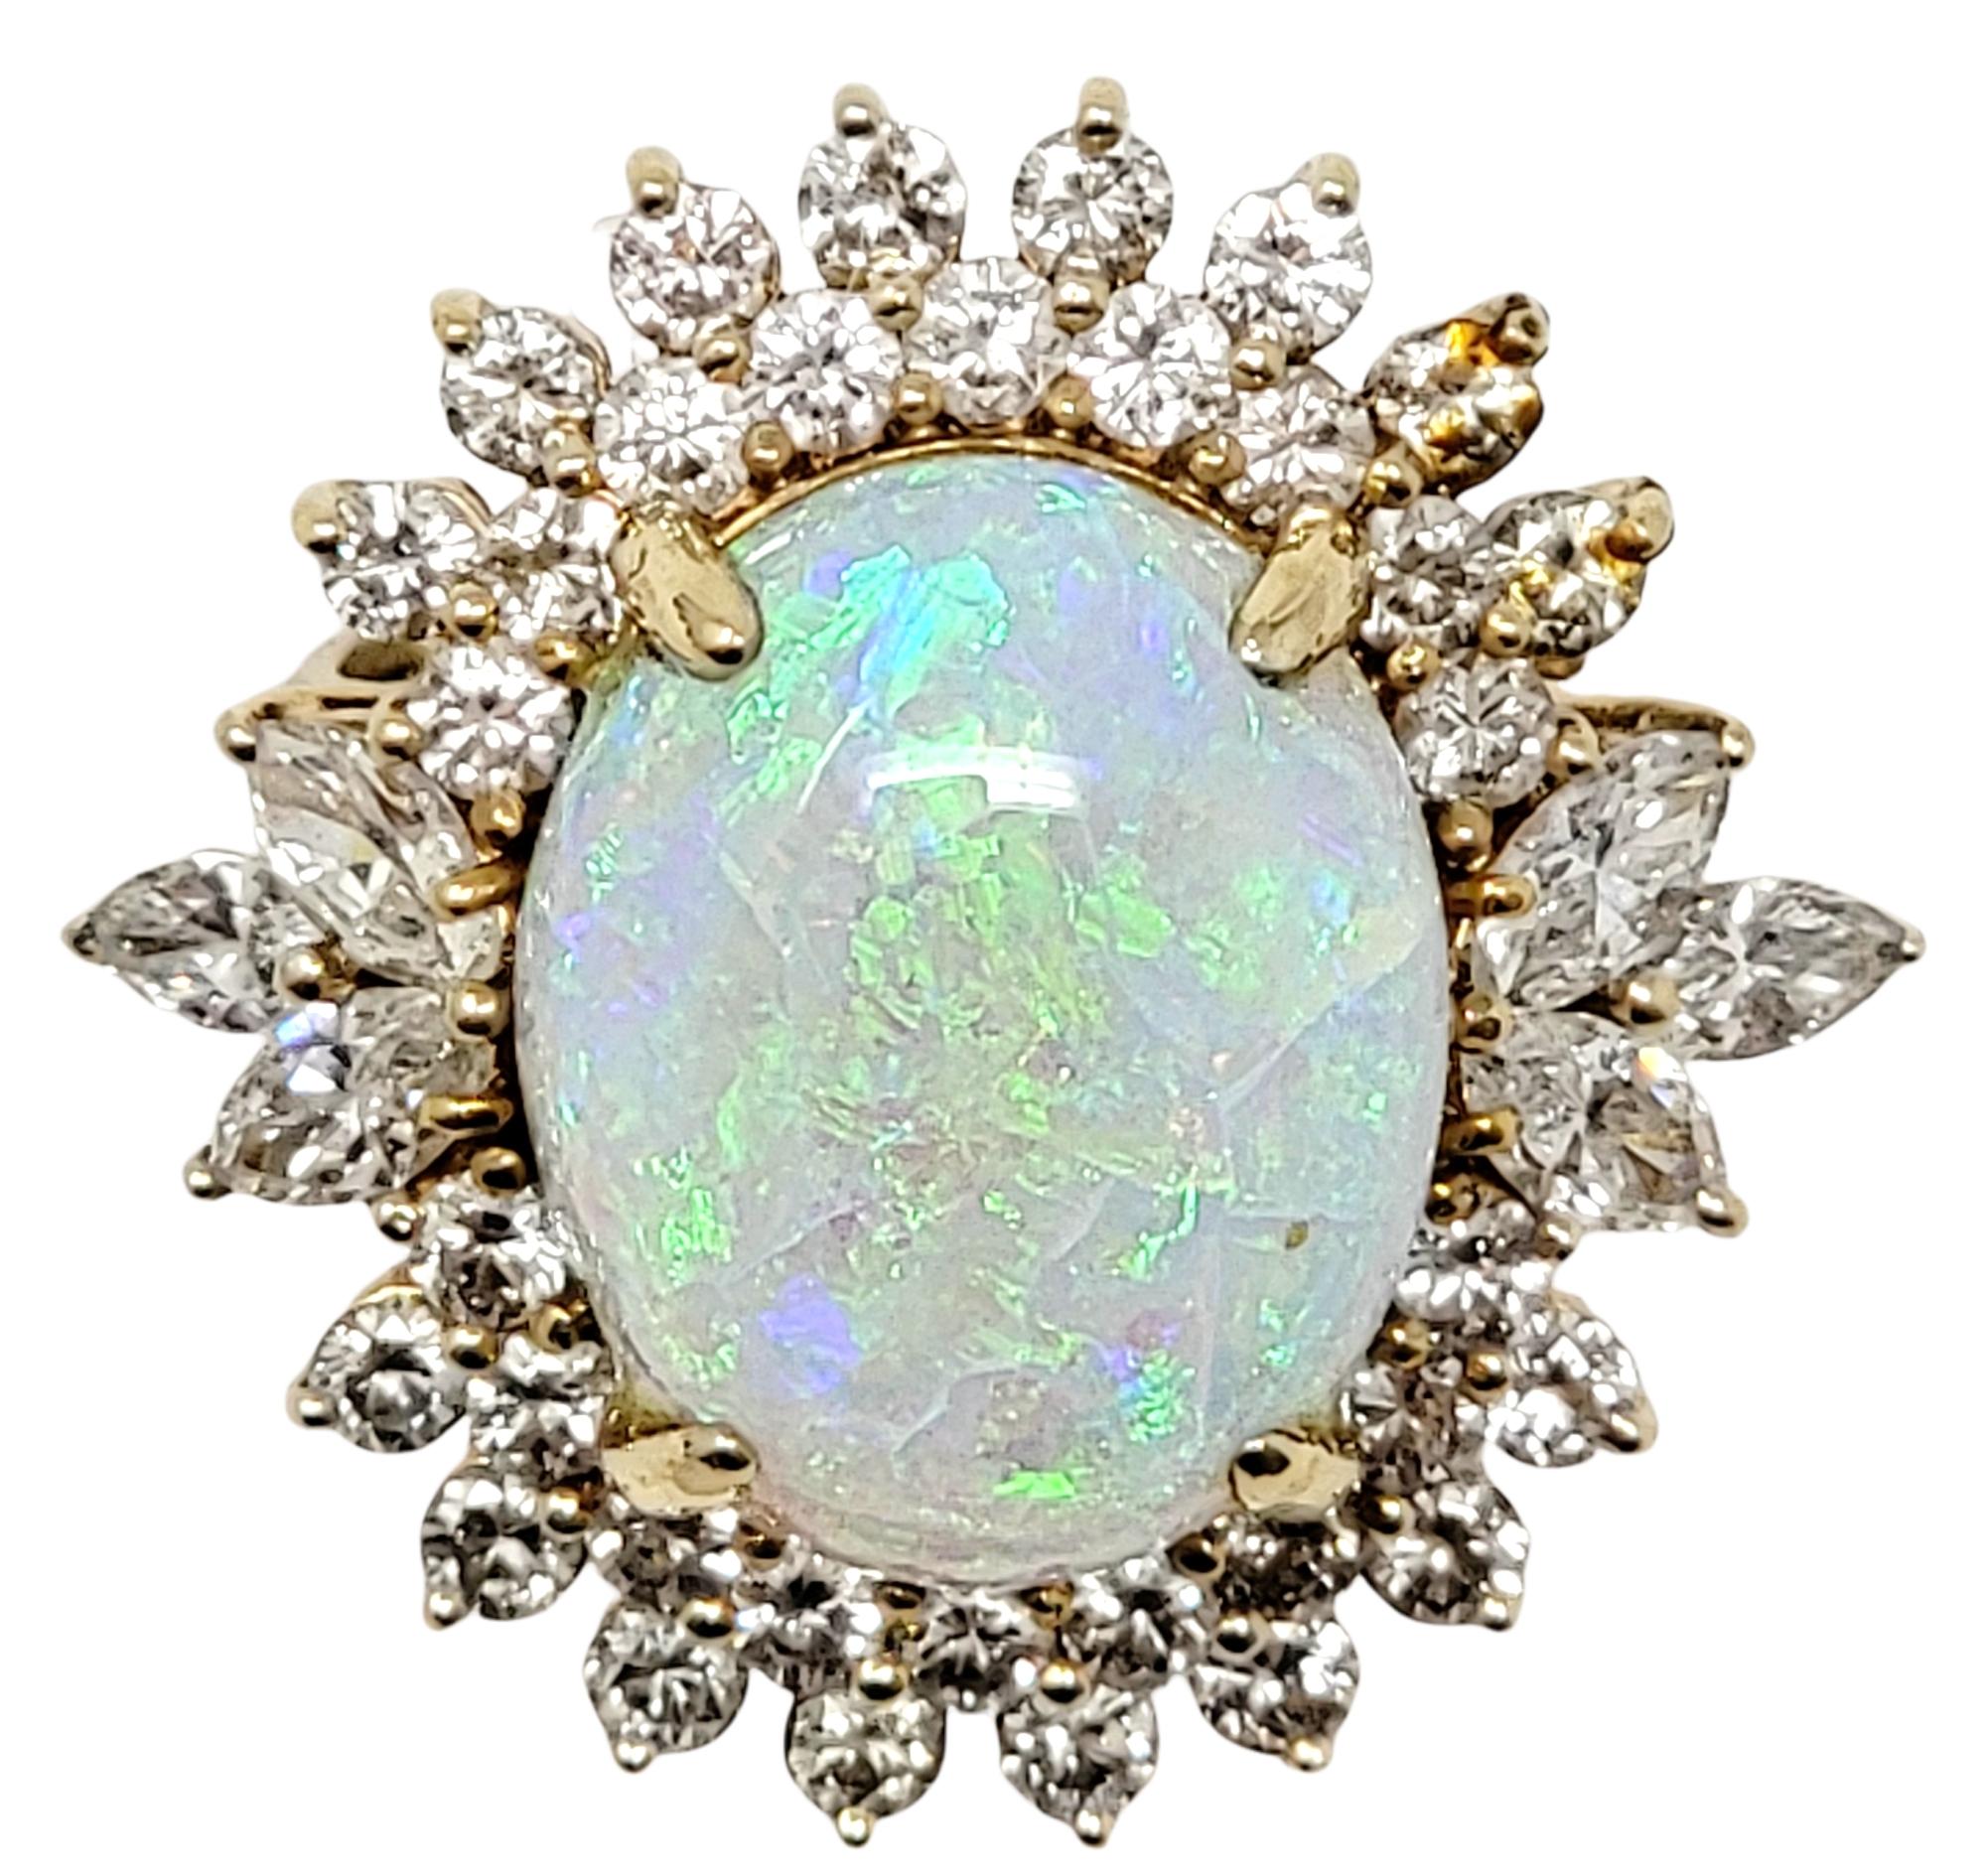 7.55 Carats Total Opal Cabochon and Diamond Halo Ring in 14 Karat Yellow Gold In Good Condition For Sale In Scottsdale, AZ